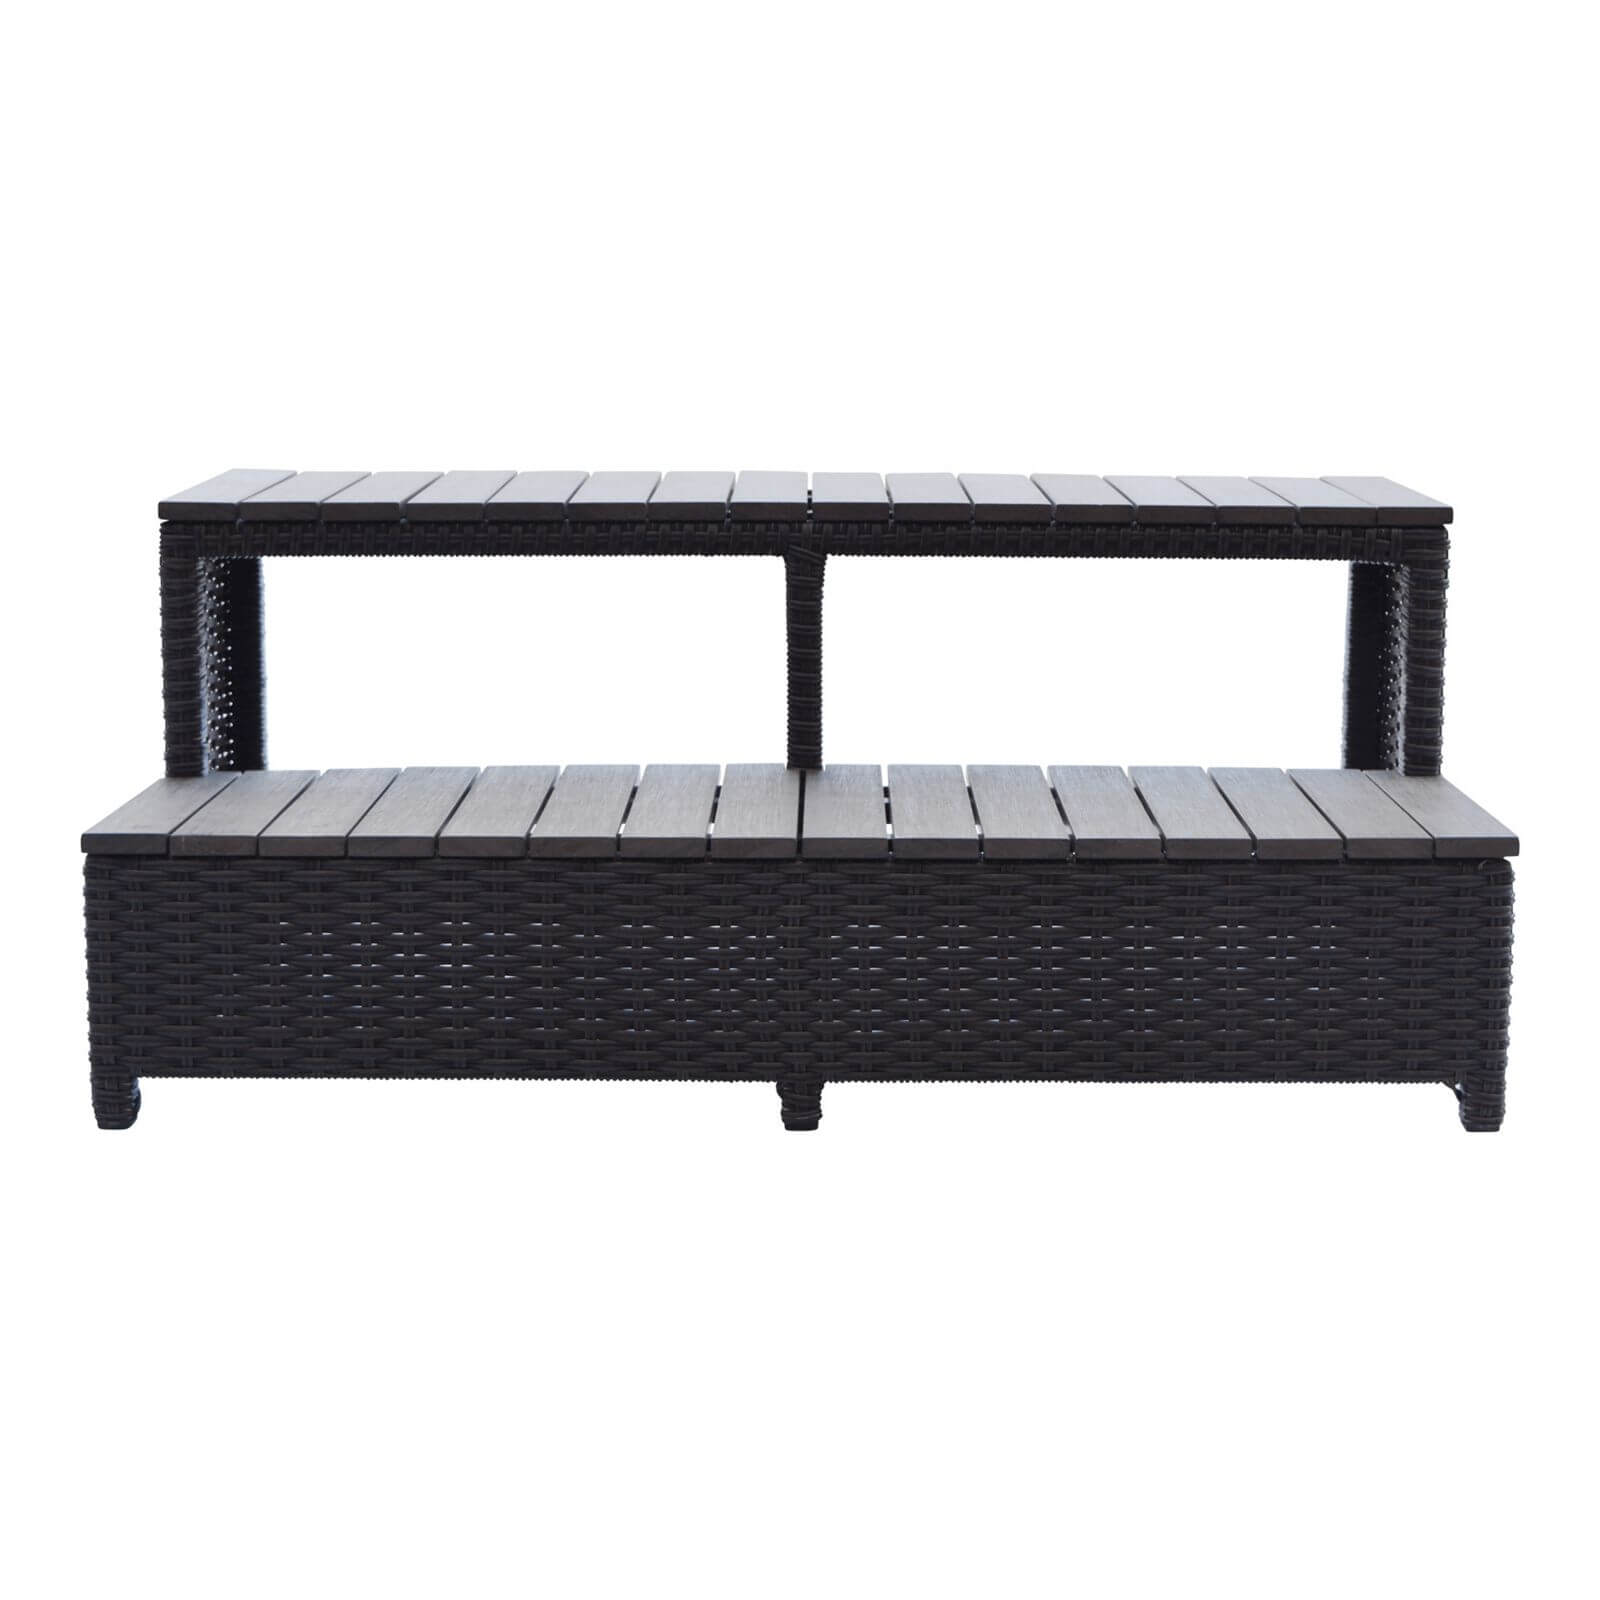 Canadian Spa Rattan Square Spa Step for 79in Hot Tub